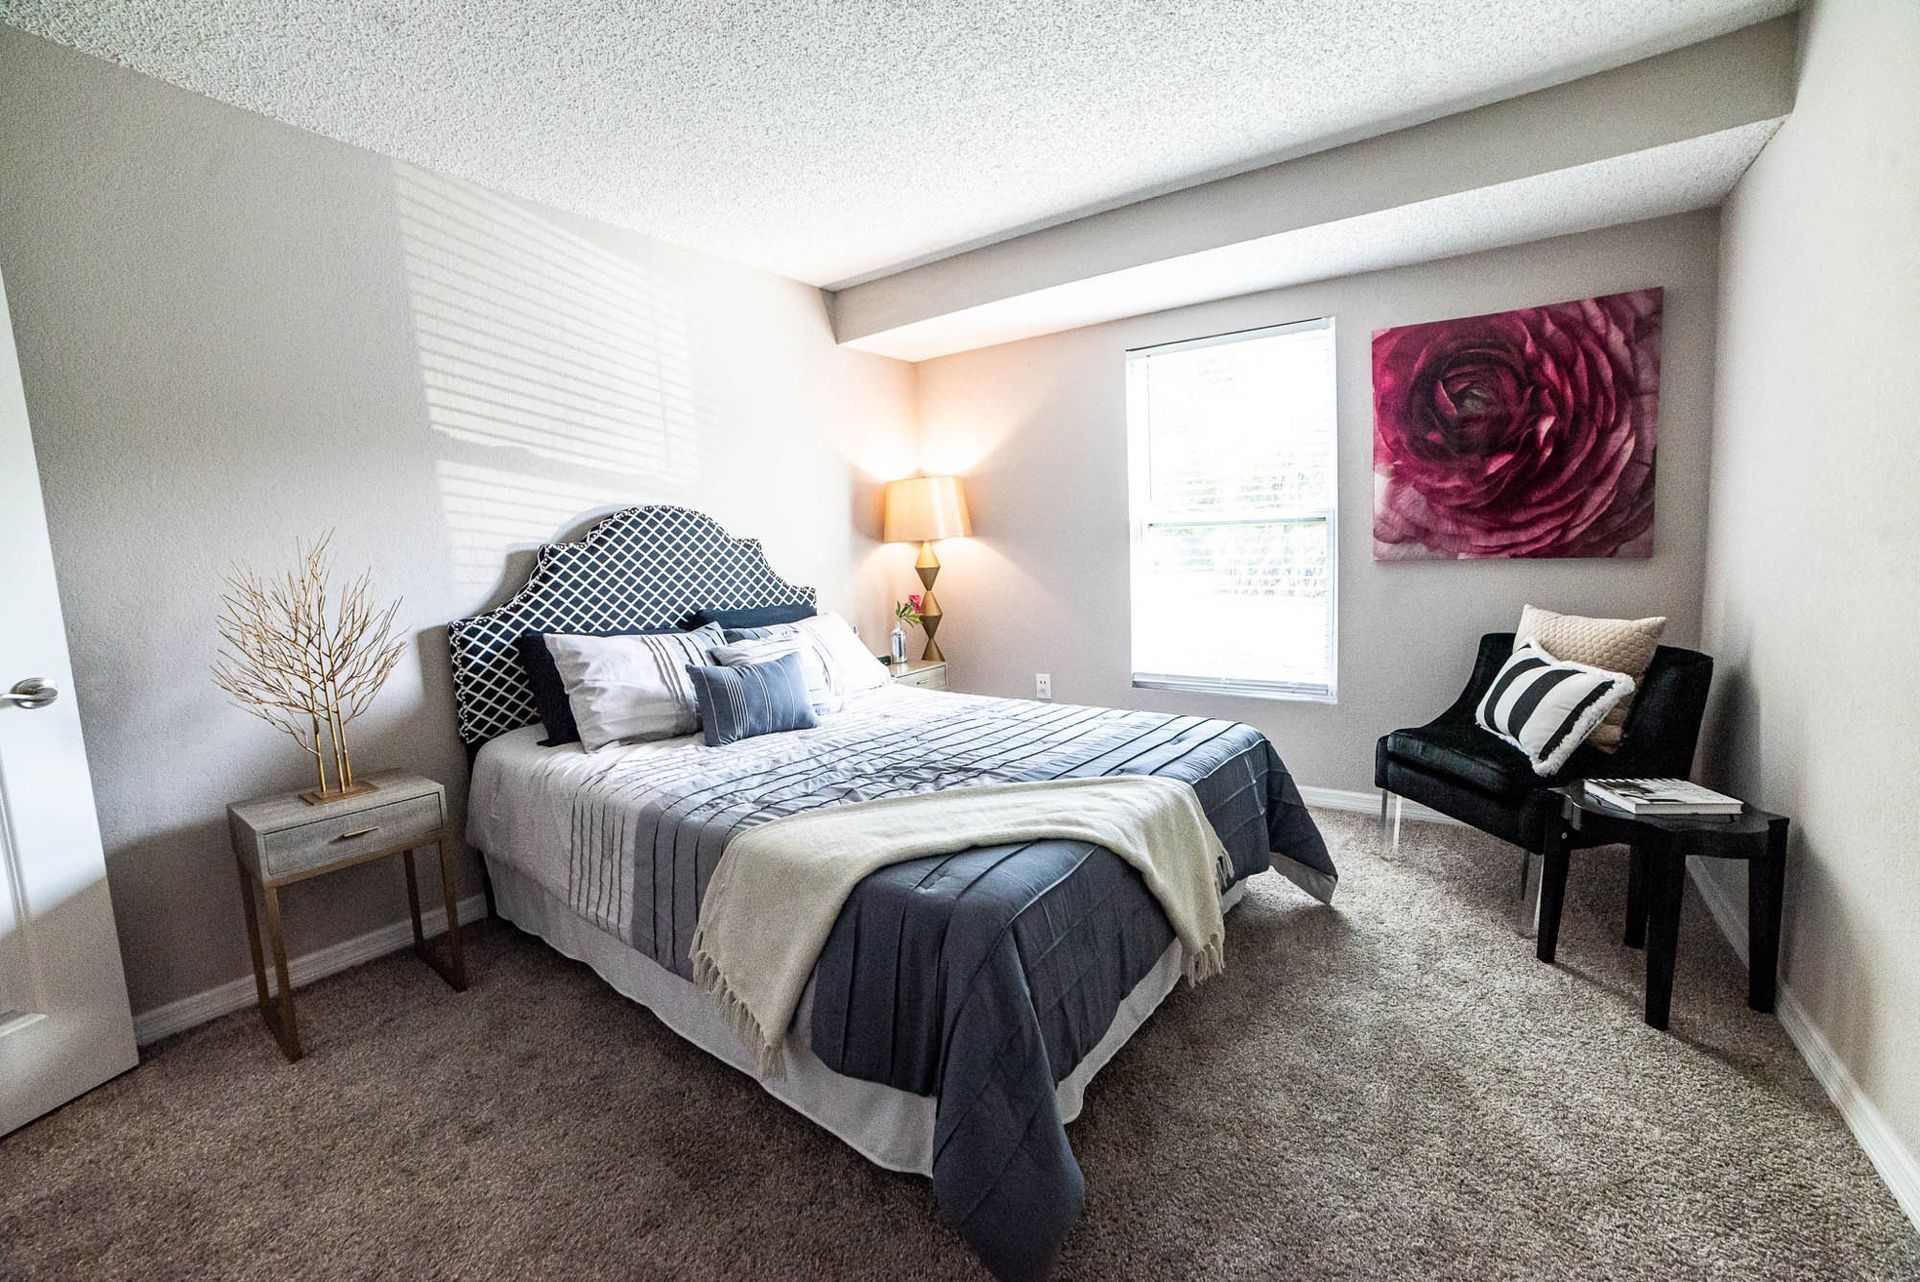 A bedroom with a bed , chair , nightstand and a painting on the wall at Trellis at The Lakes.